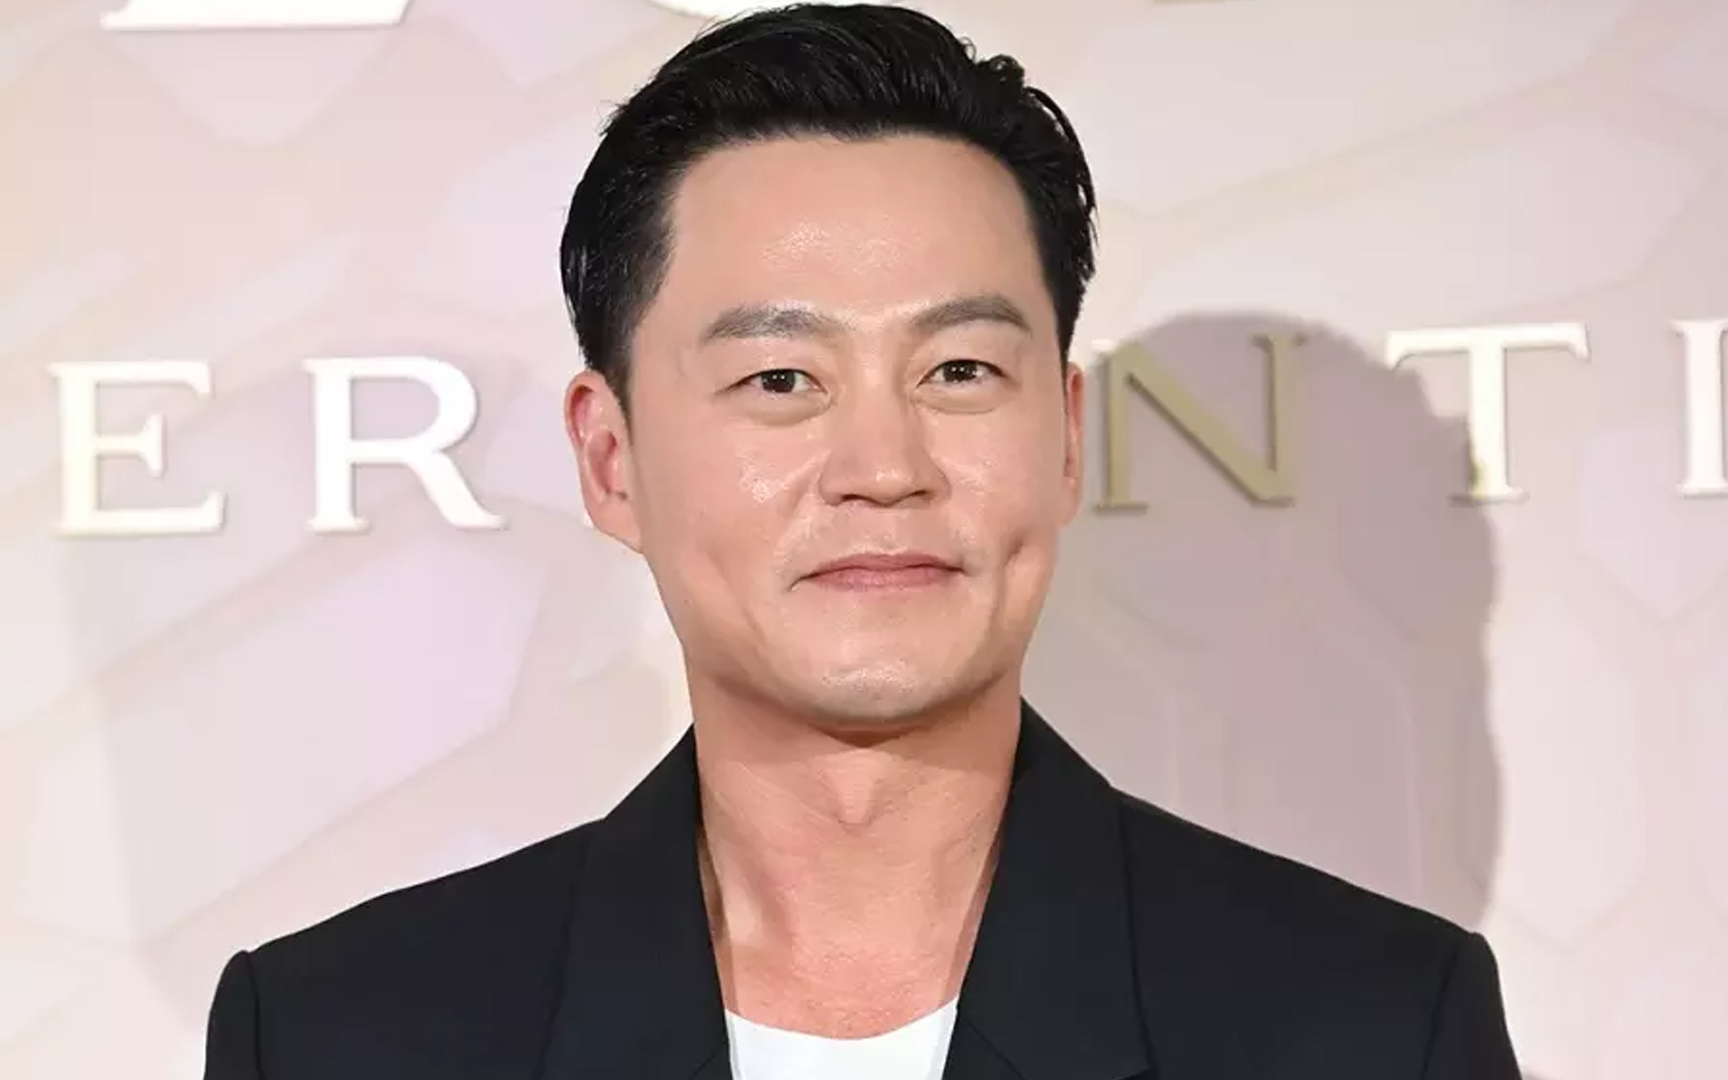 Lee Seo Jin ranks number 1 on the real-time search ranking on various portal sites following “Actor L” gaslighting rumors